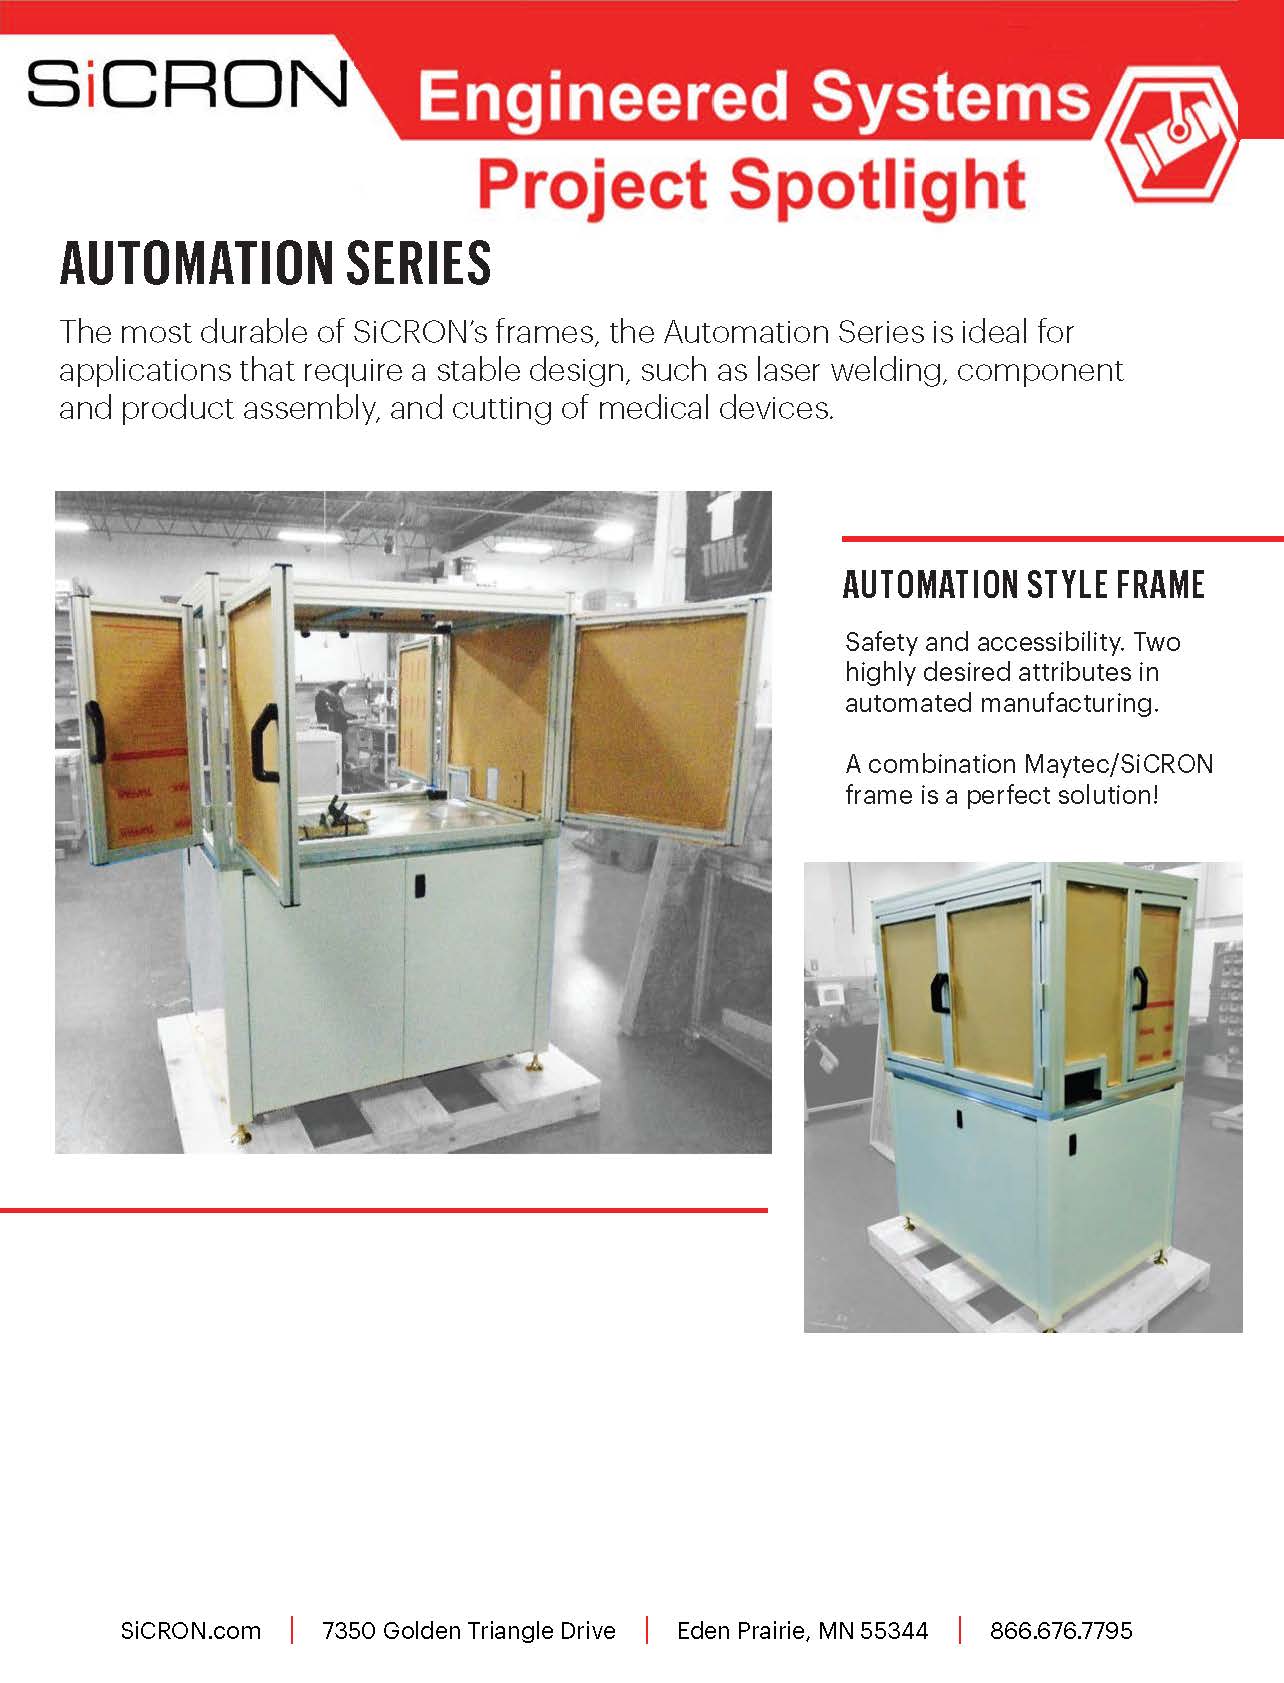 Automation Series brochure